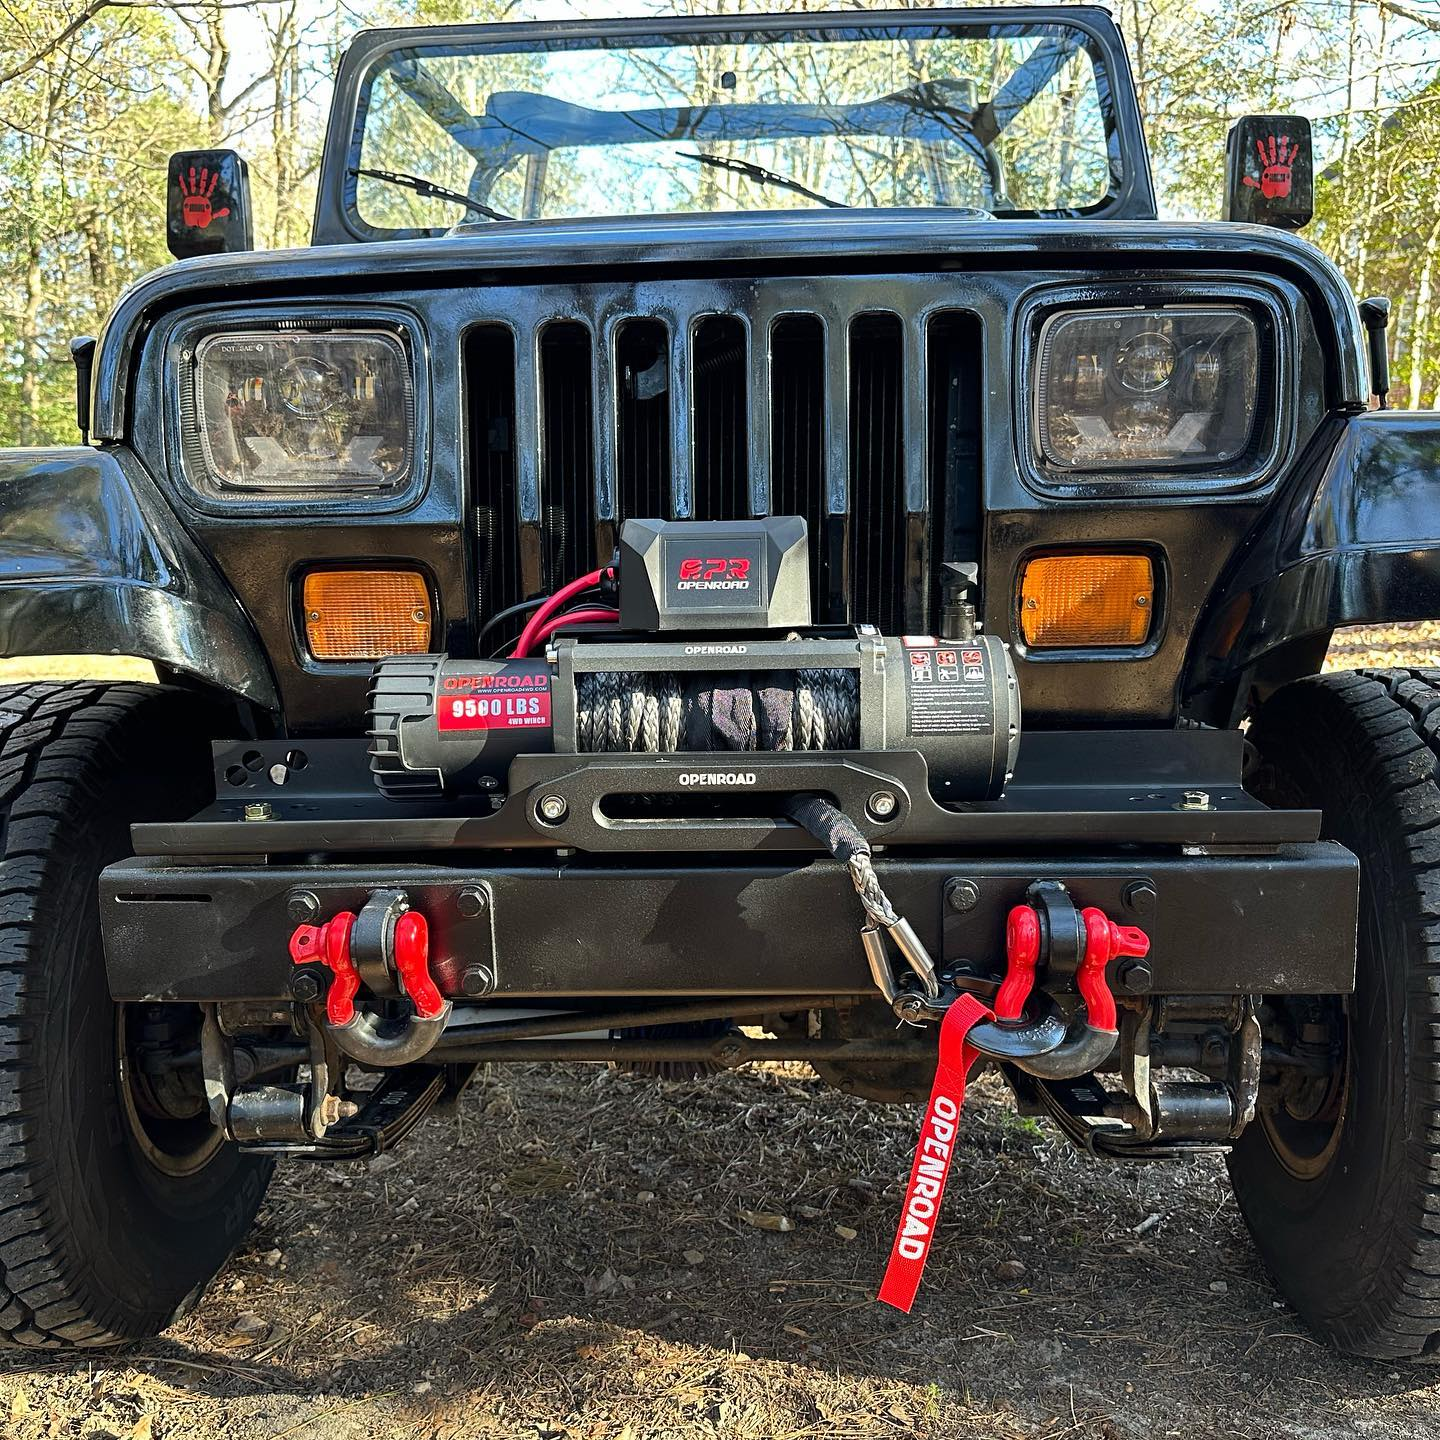 OPENROAD 9,500lbs 12V electric Winch black matte-Panther Series 2S winch OPENROAD   